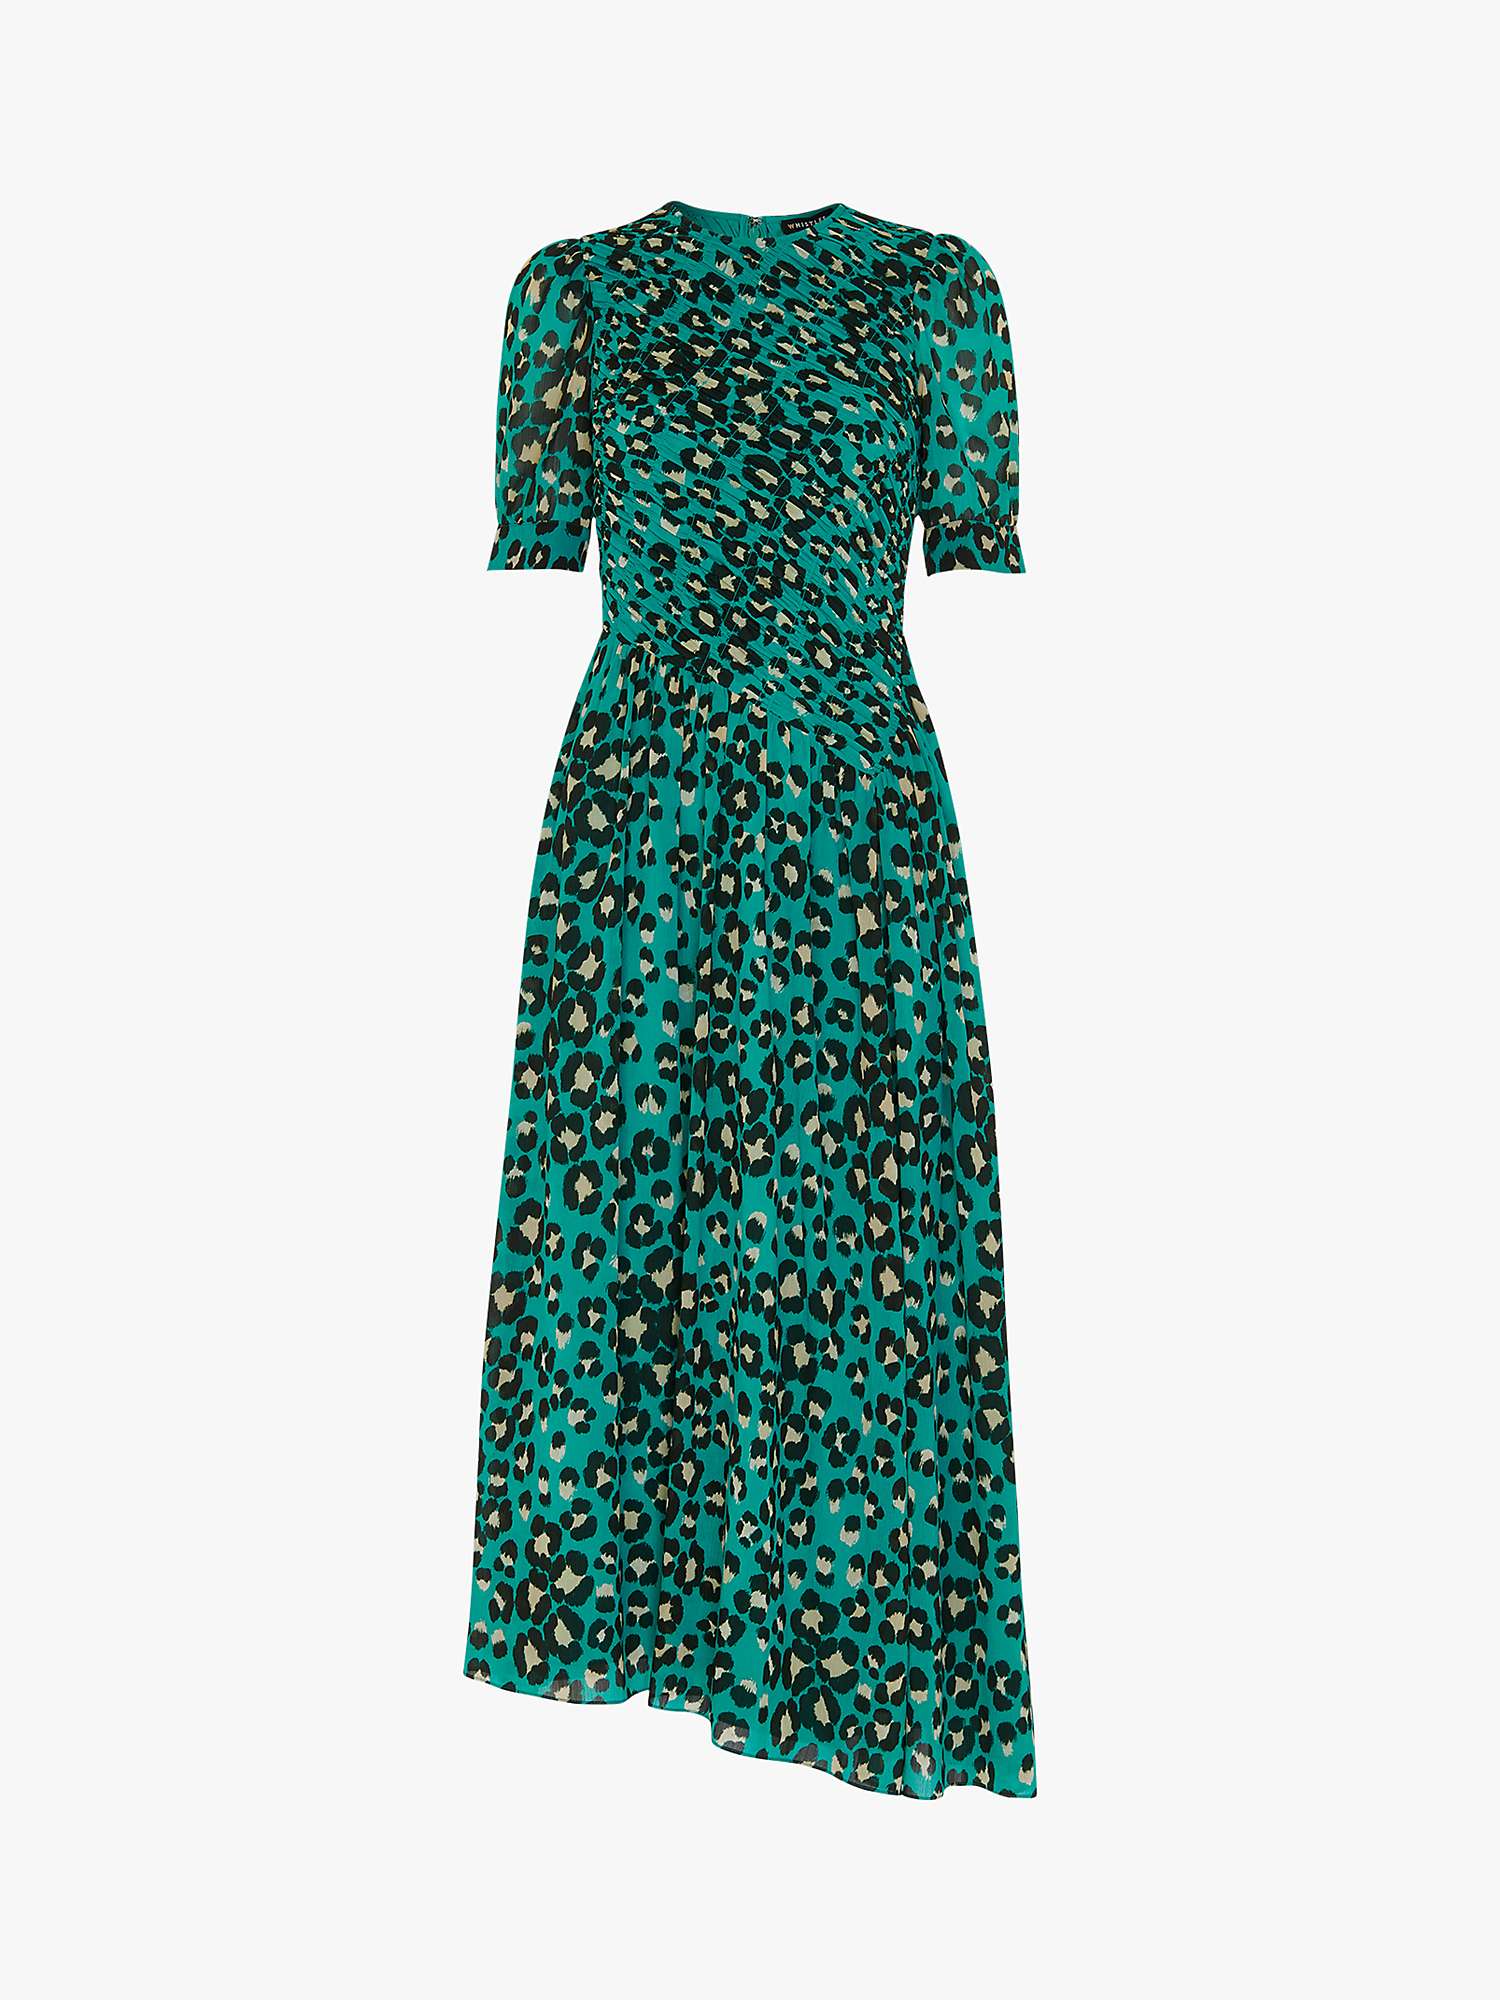 Buy Whistles Petite Painted Leopard Midi Shirred Dress, Green/Multi Online at johnlewis.com